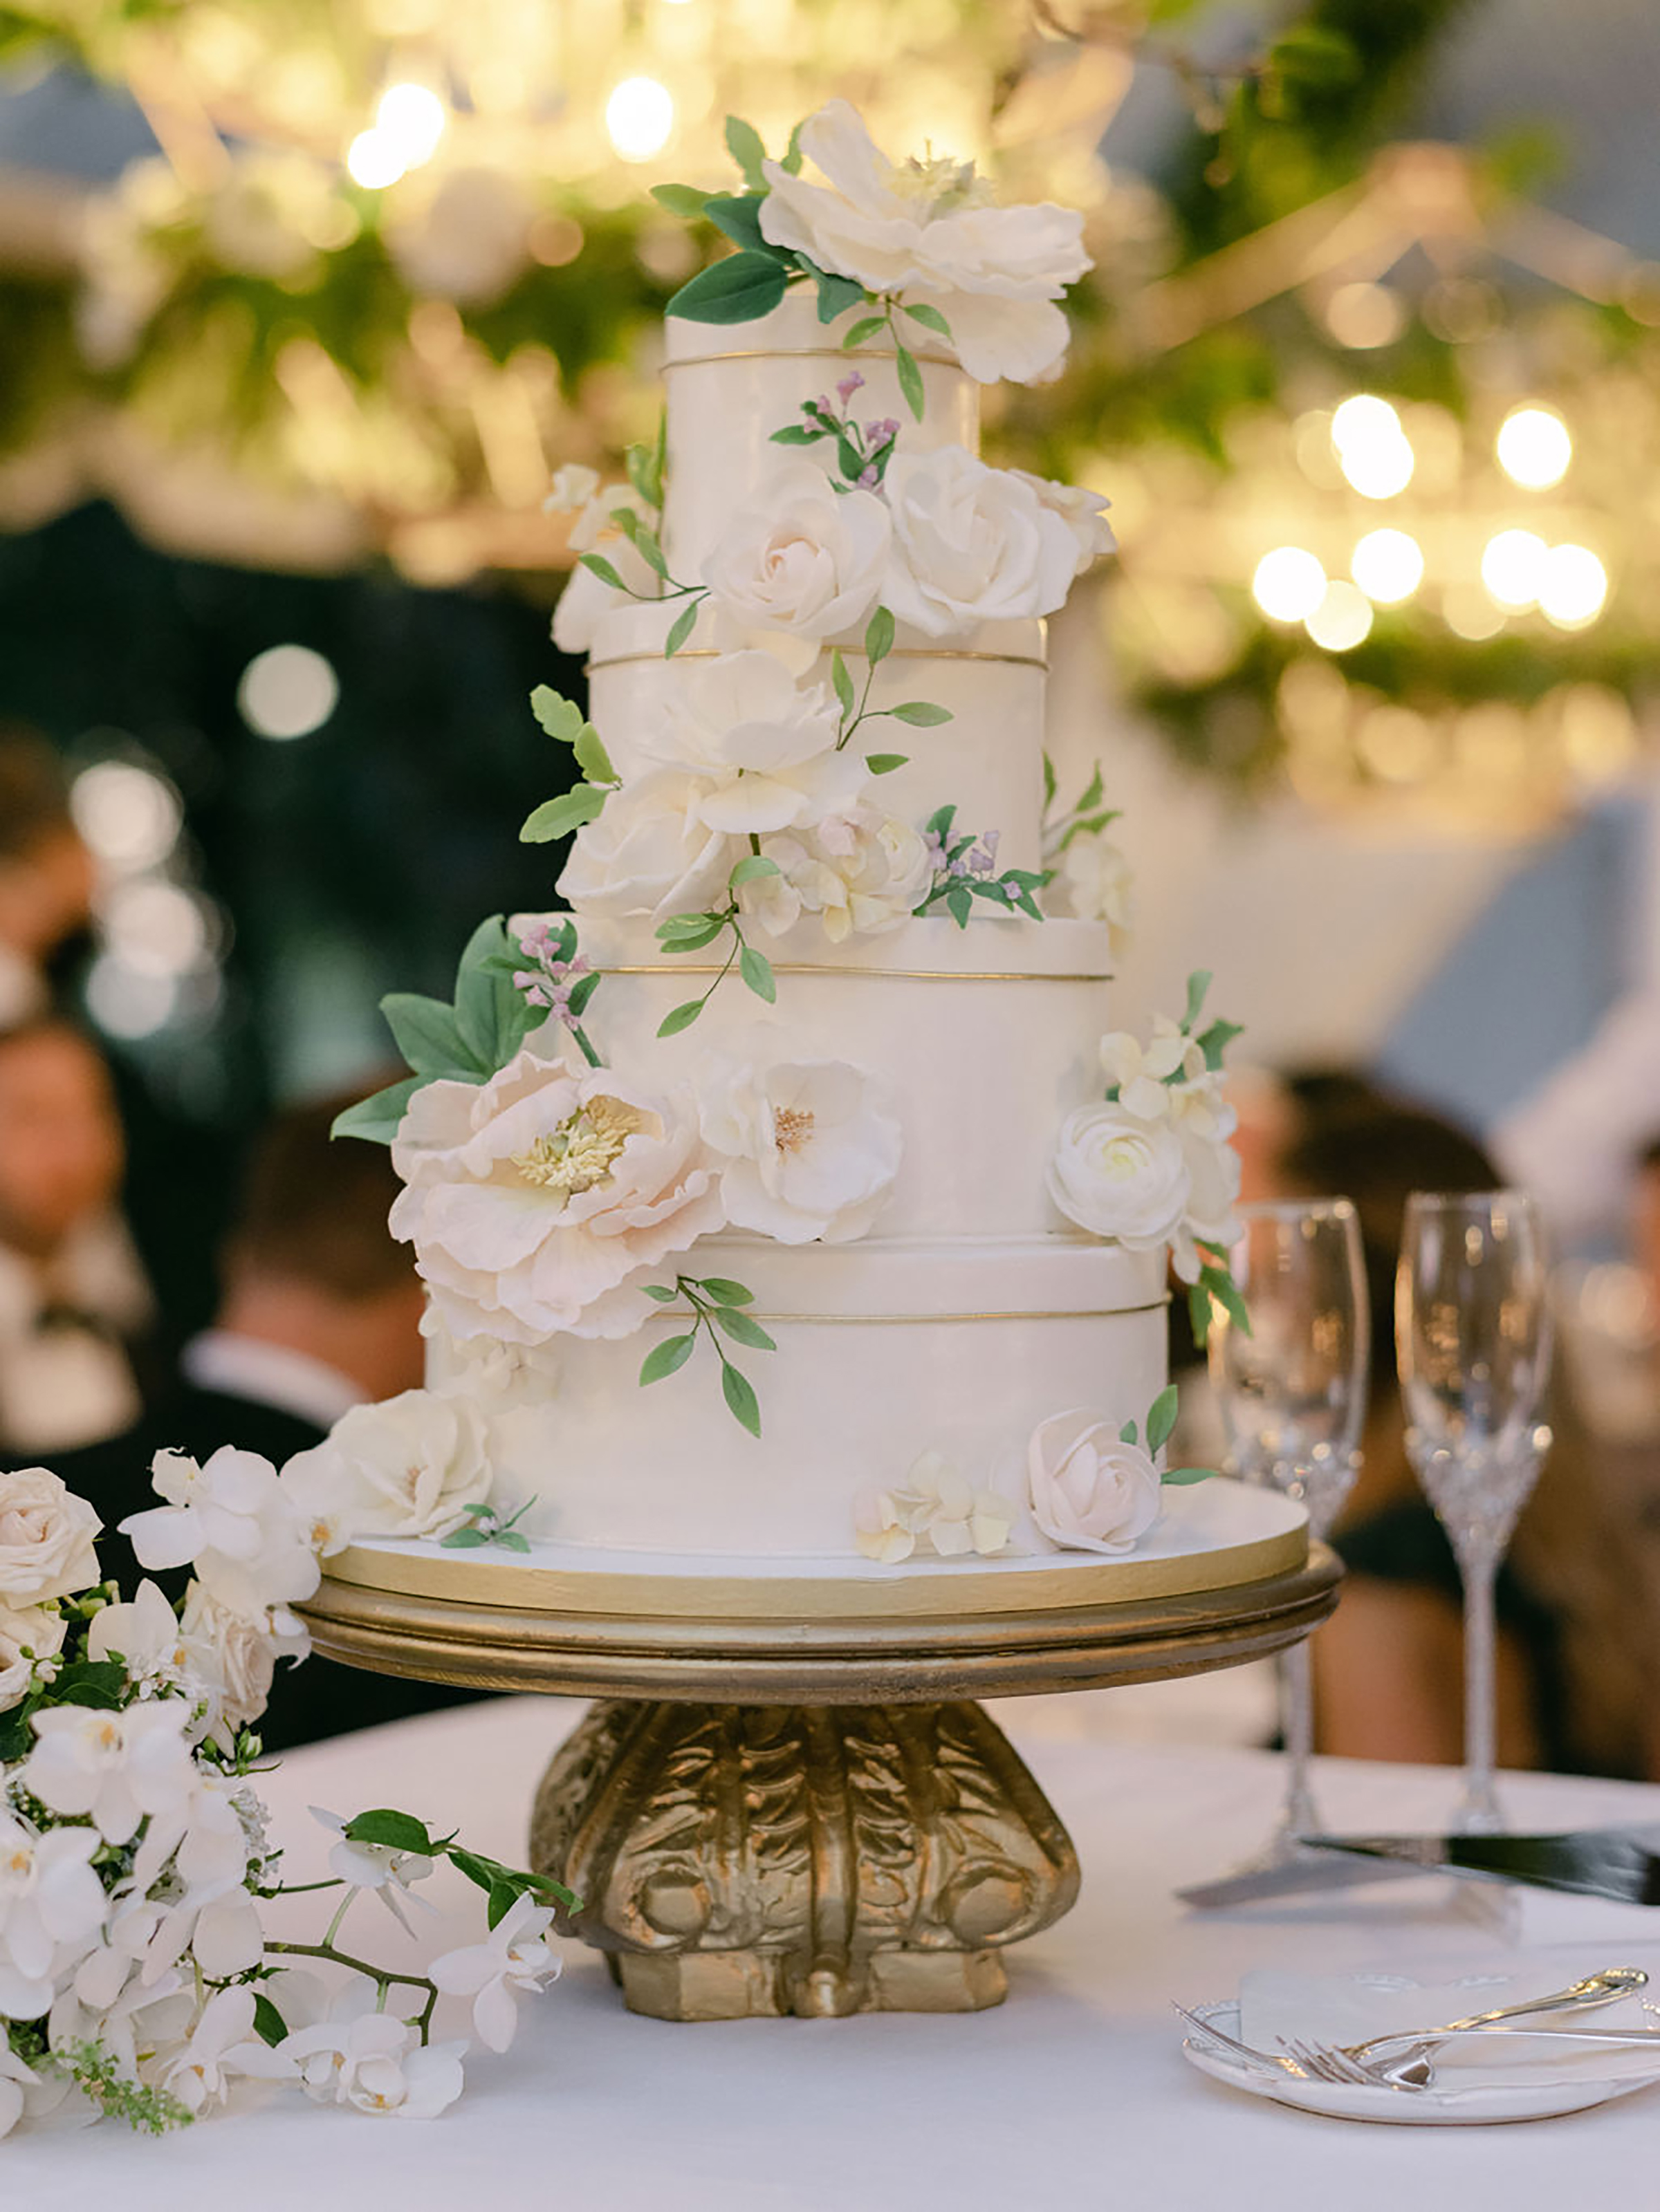 A four-tier white wedding cake with white sugar flowers artfully places on each tier.